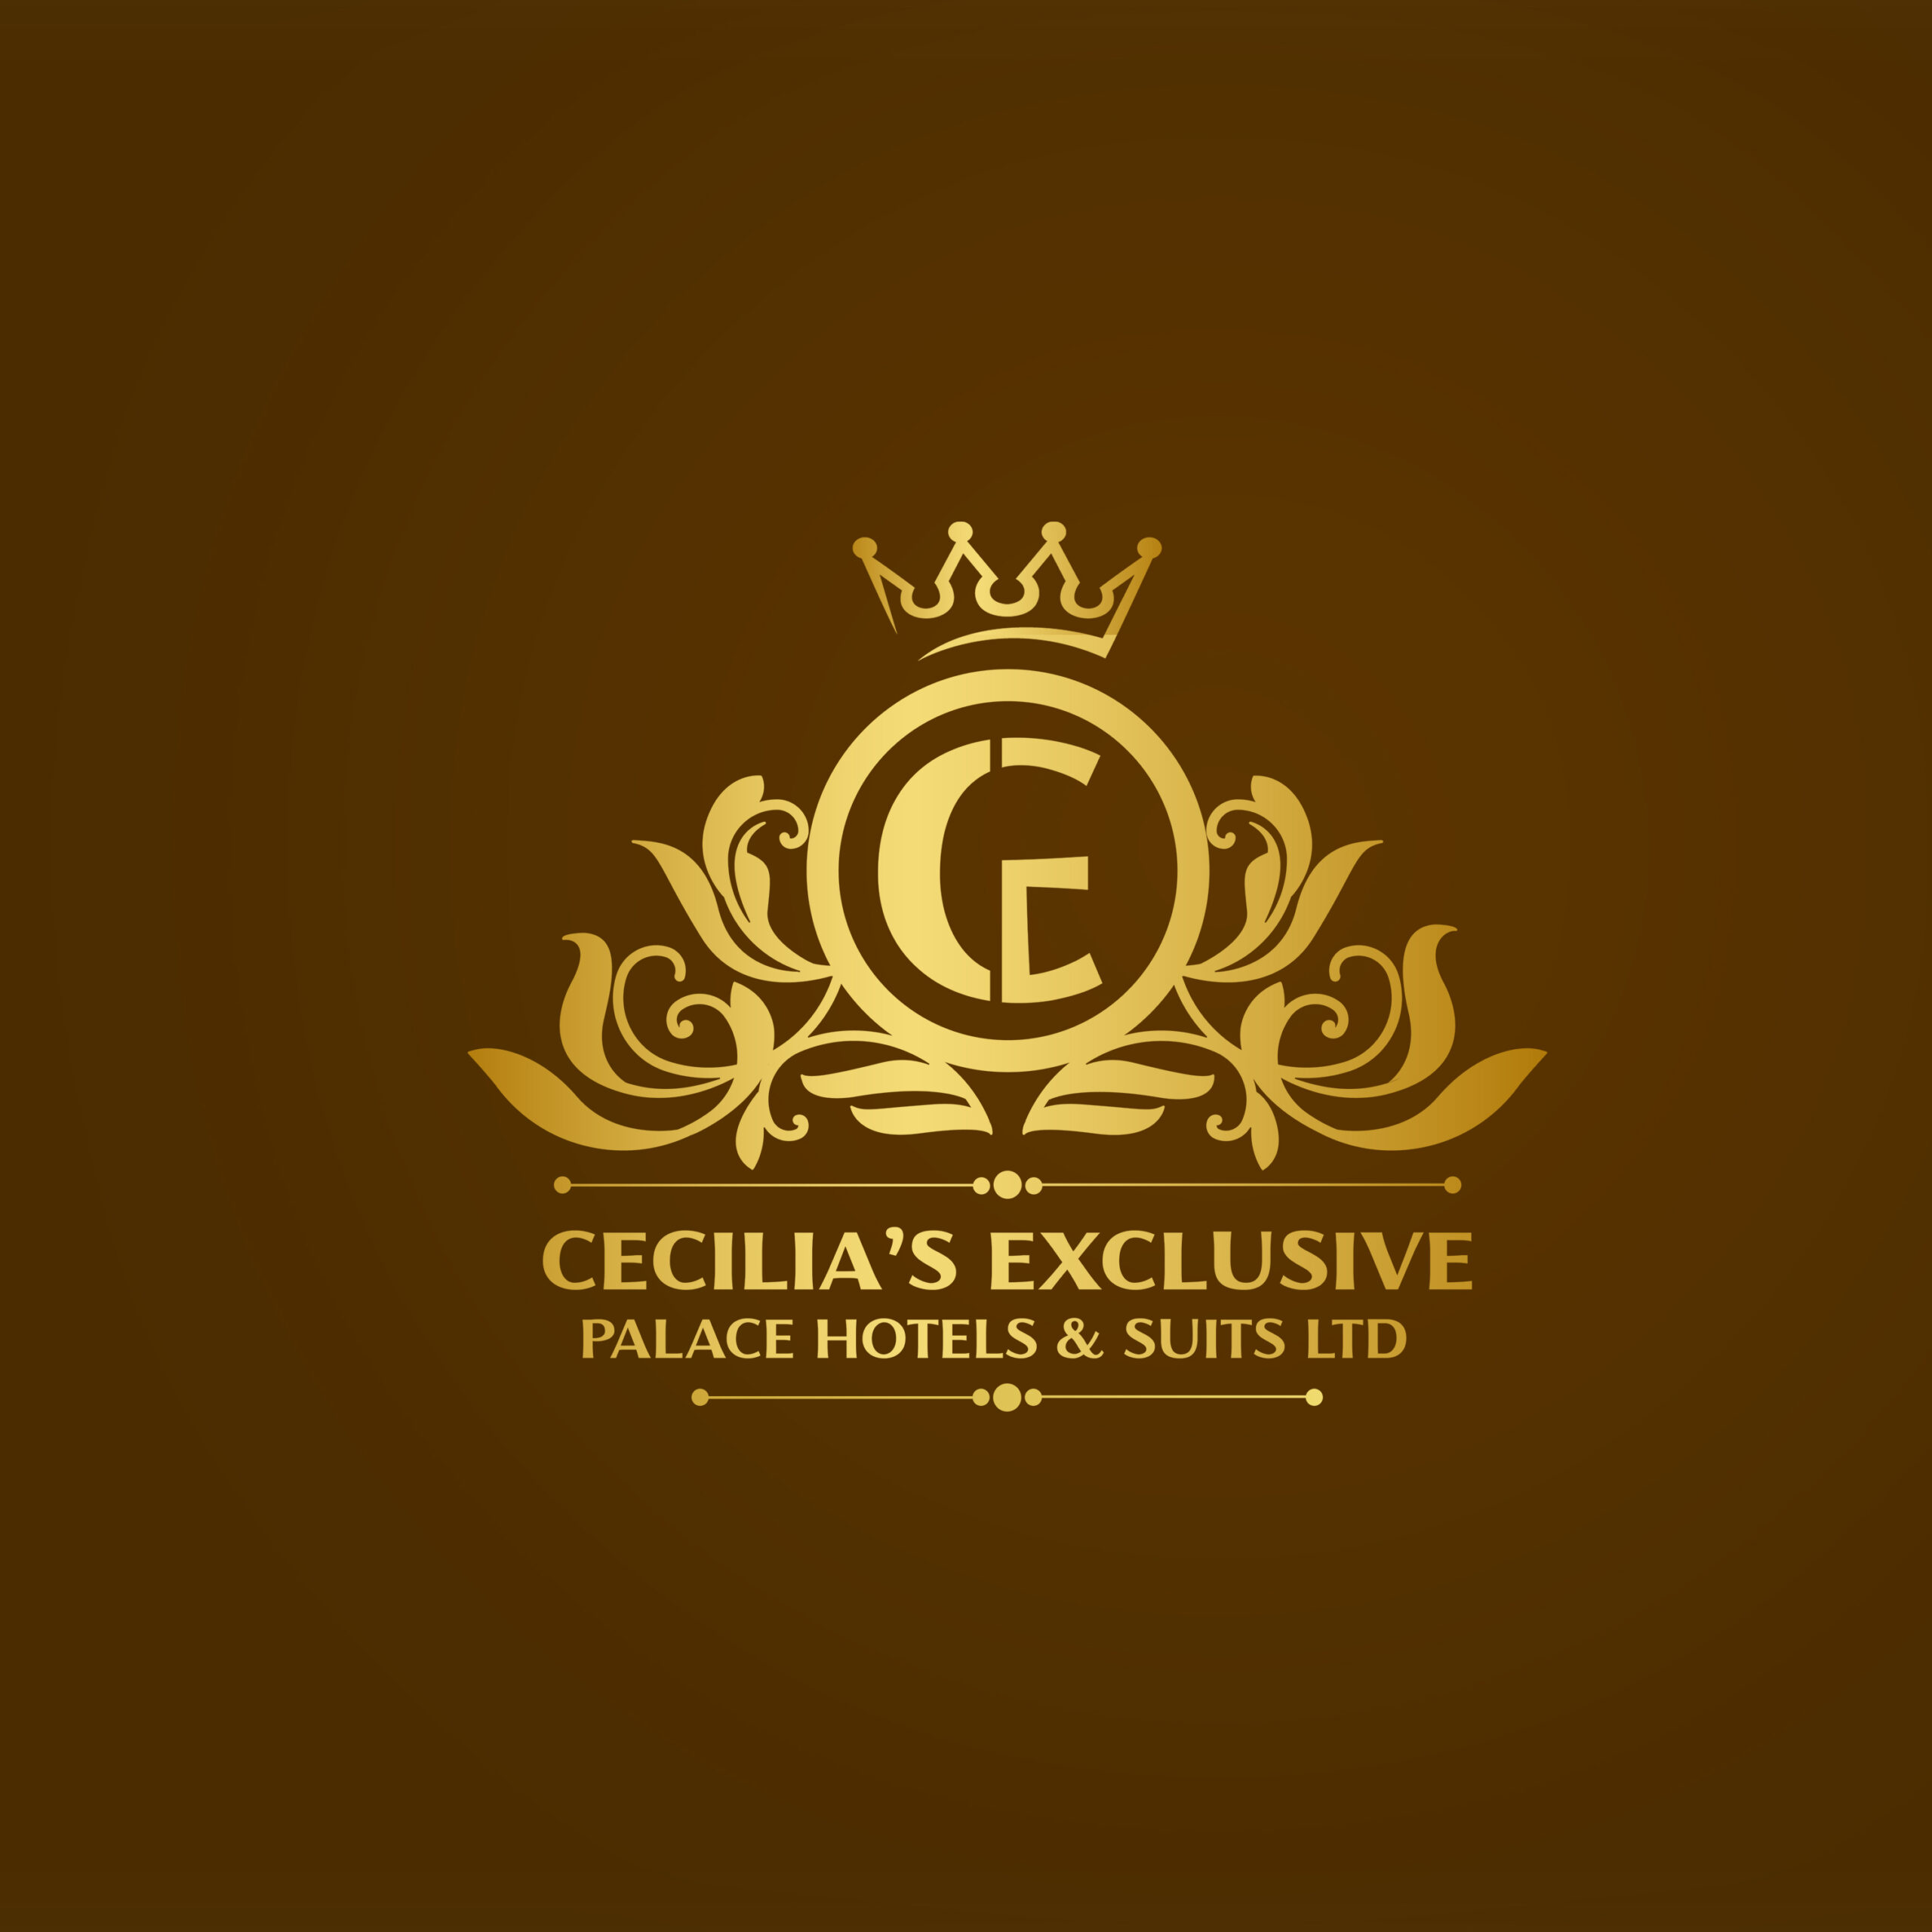 Cecilia Exclusive Palace Hotels